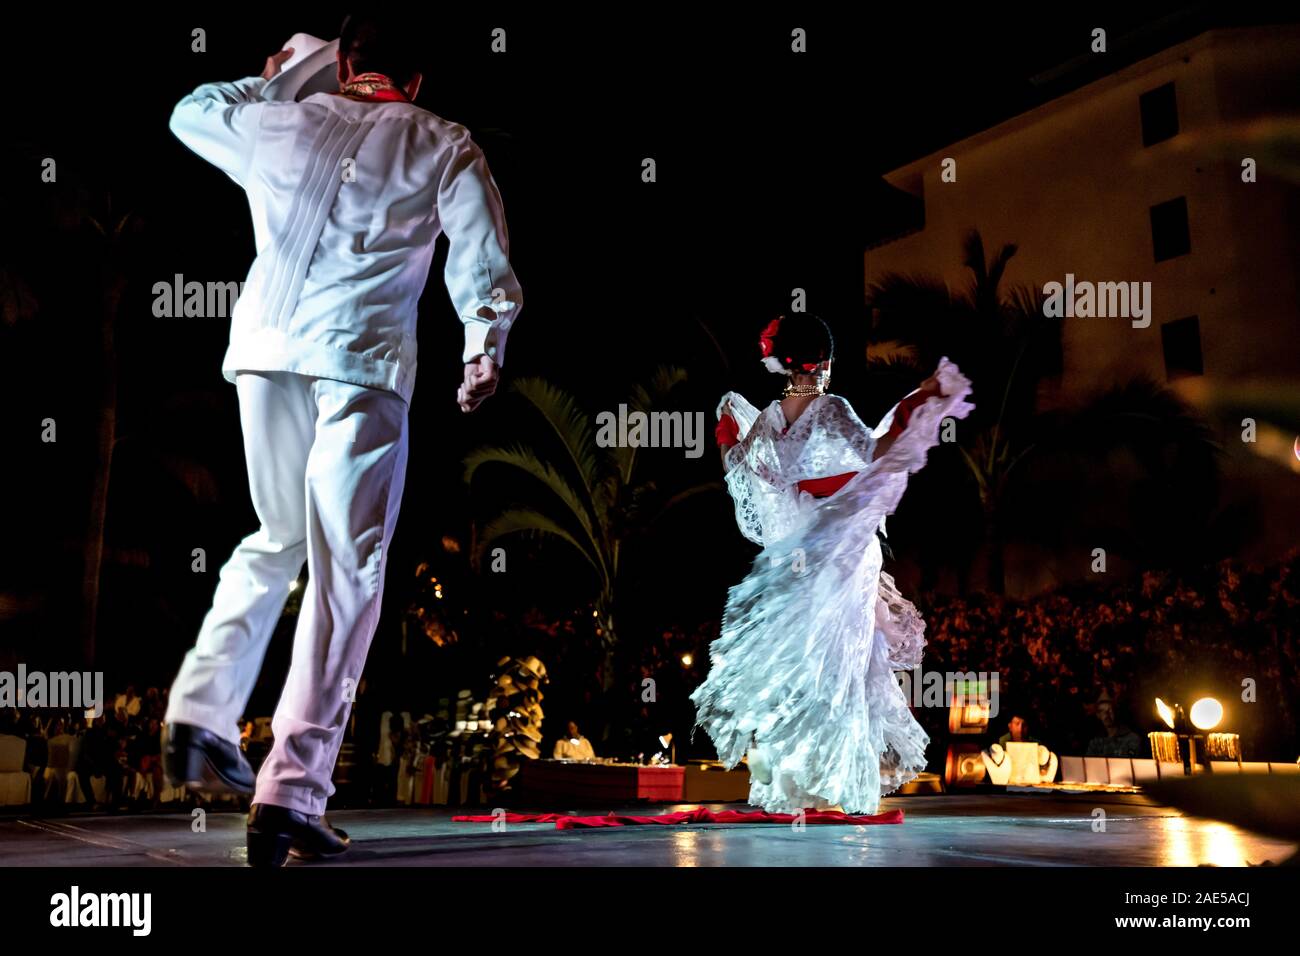 Two Mexican dancers in white costumes performing La Bamba, the traditional dance of marriage, viewed from behind in motion. Puerto Vallarta, Mexico. Stock Photo